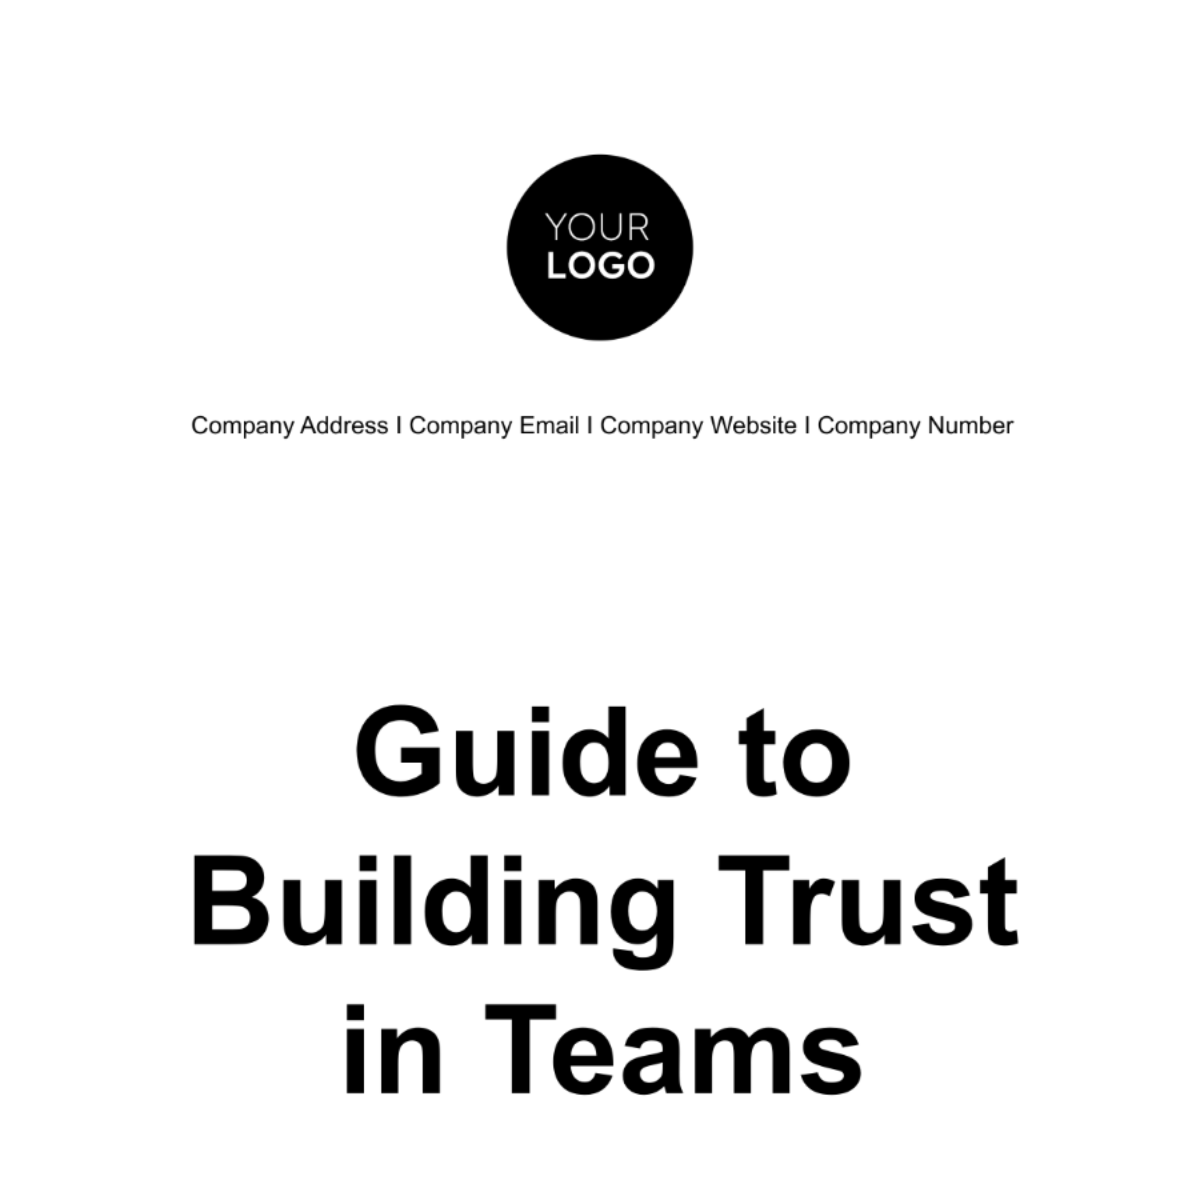 Free Guide to Building Trust in Teams HR Template